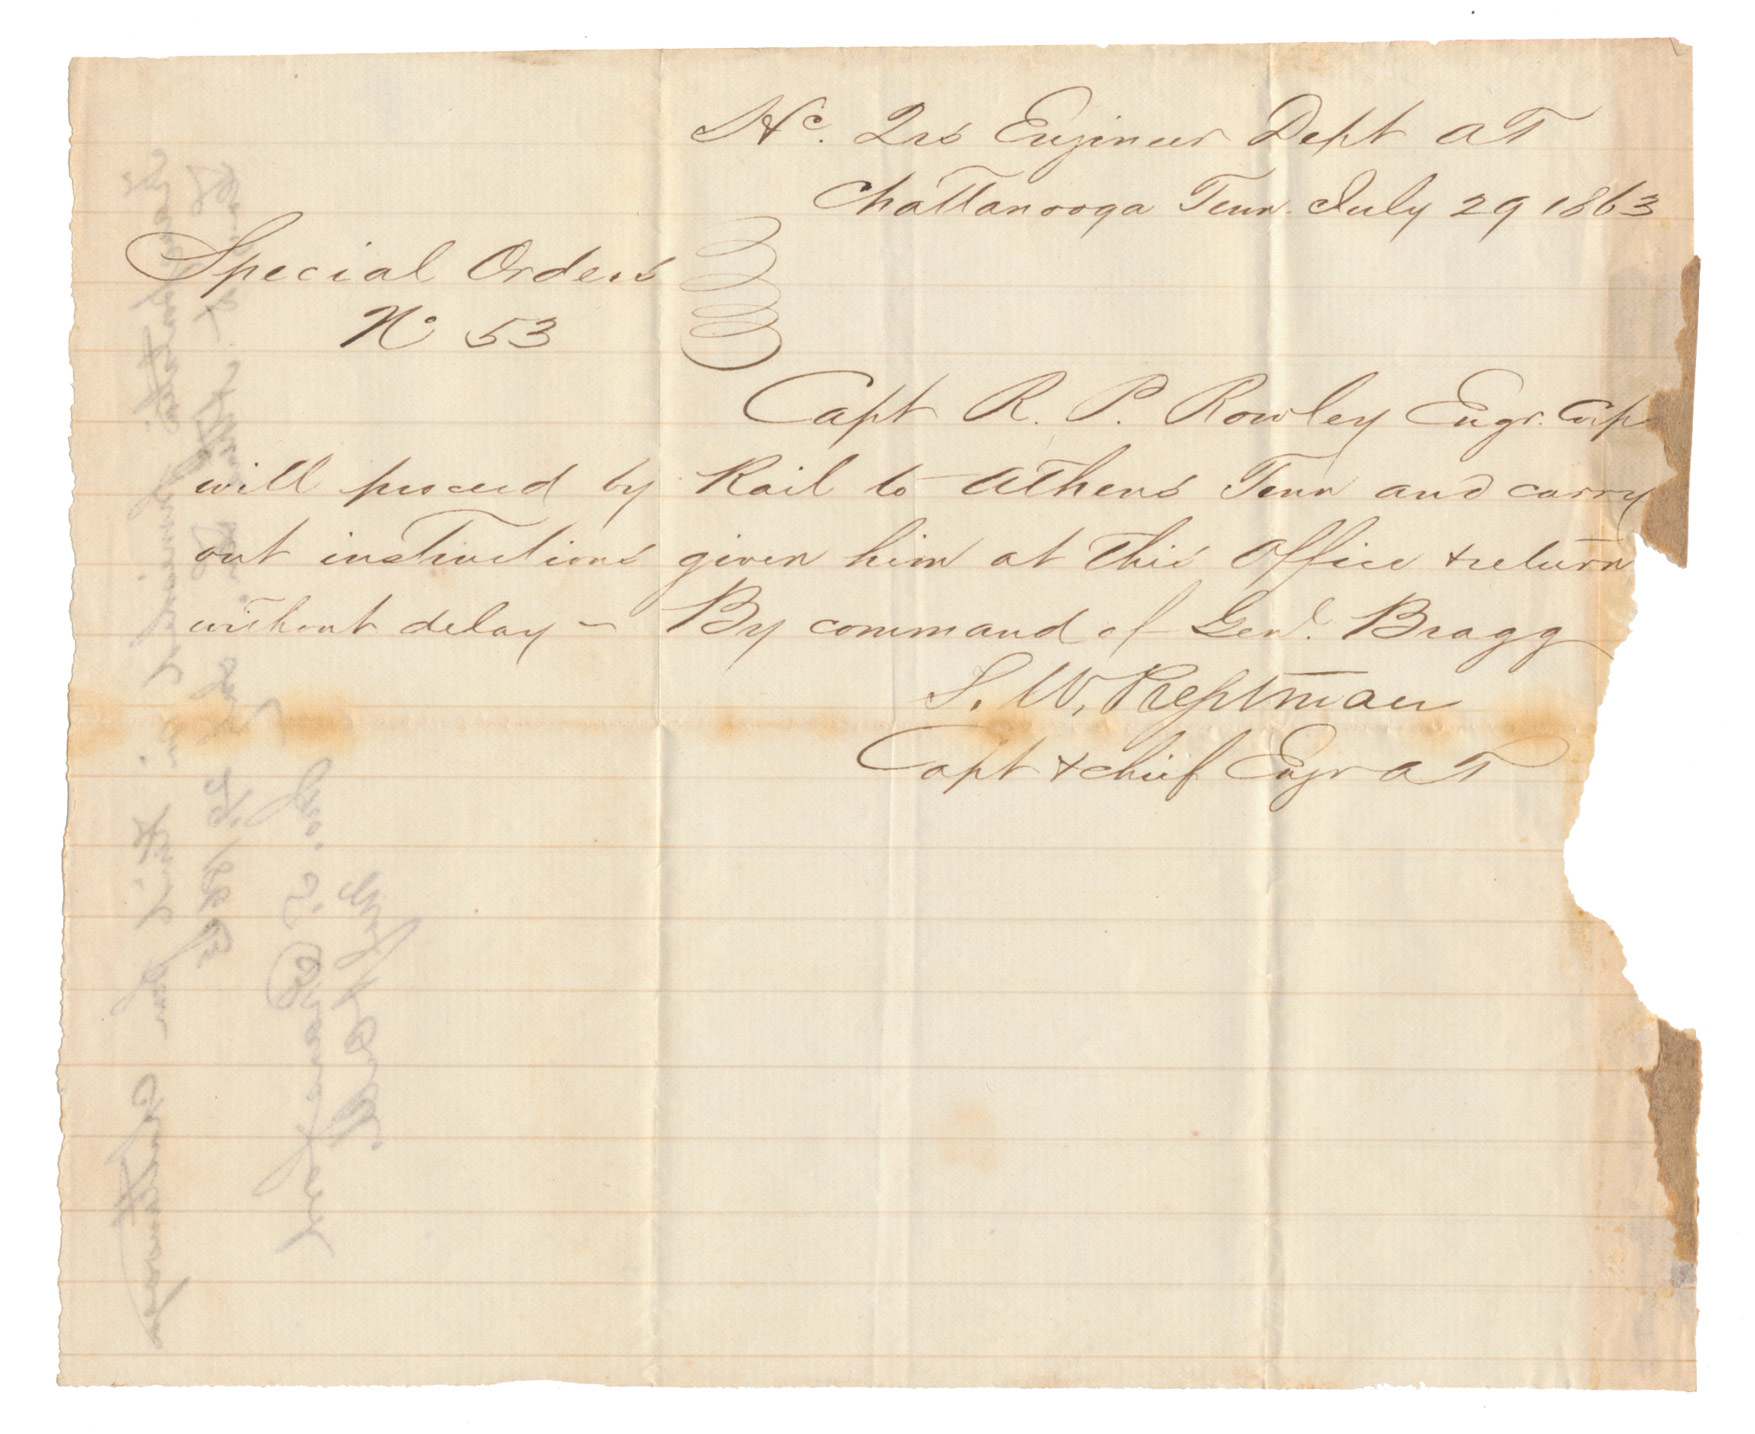 ARMY OF TENNESSEE STAFF LETTER - CONFEDERATE CORPS OF ENGINEERS, CAPT. R.P. ROWLEY